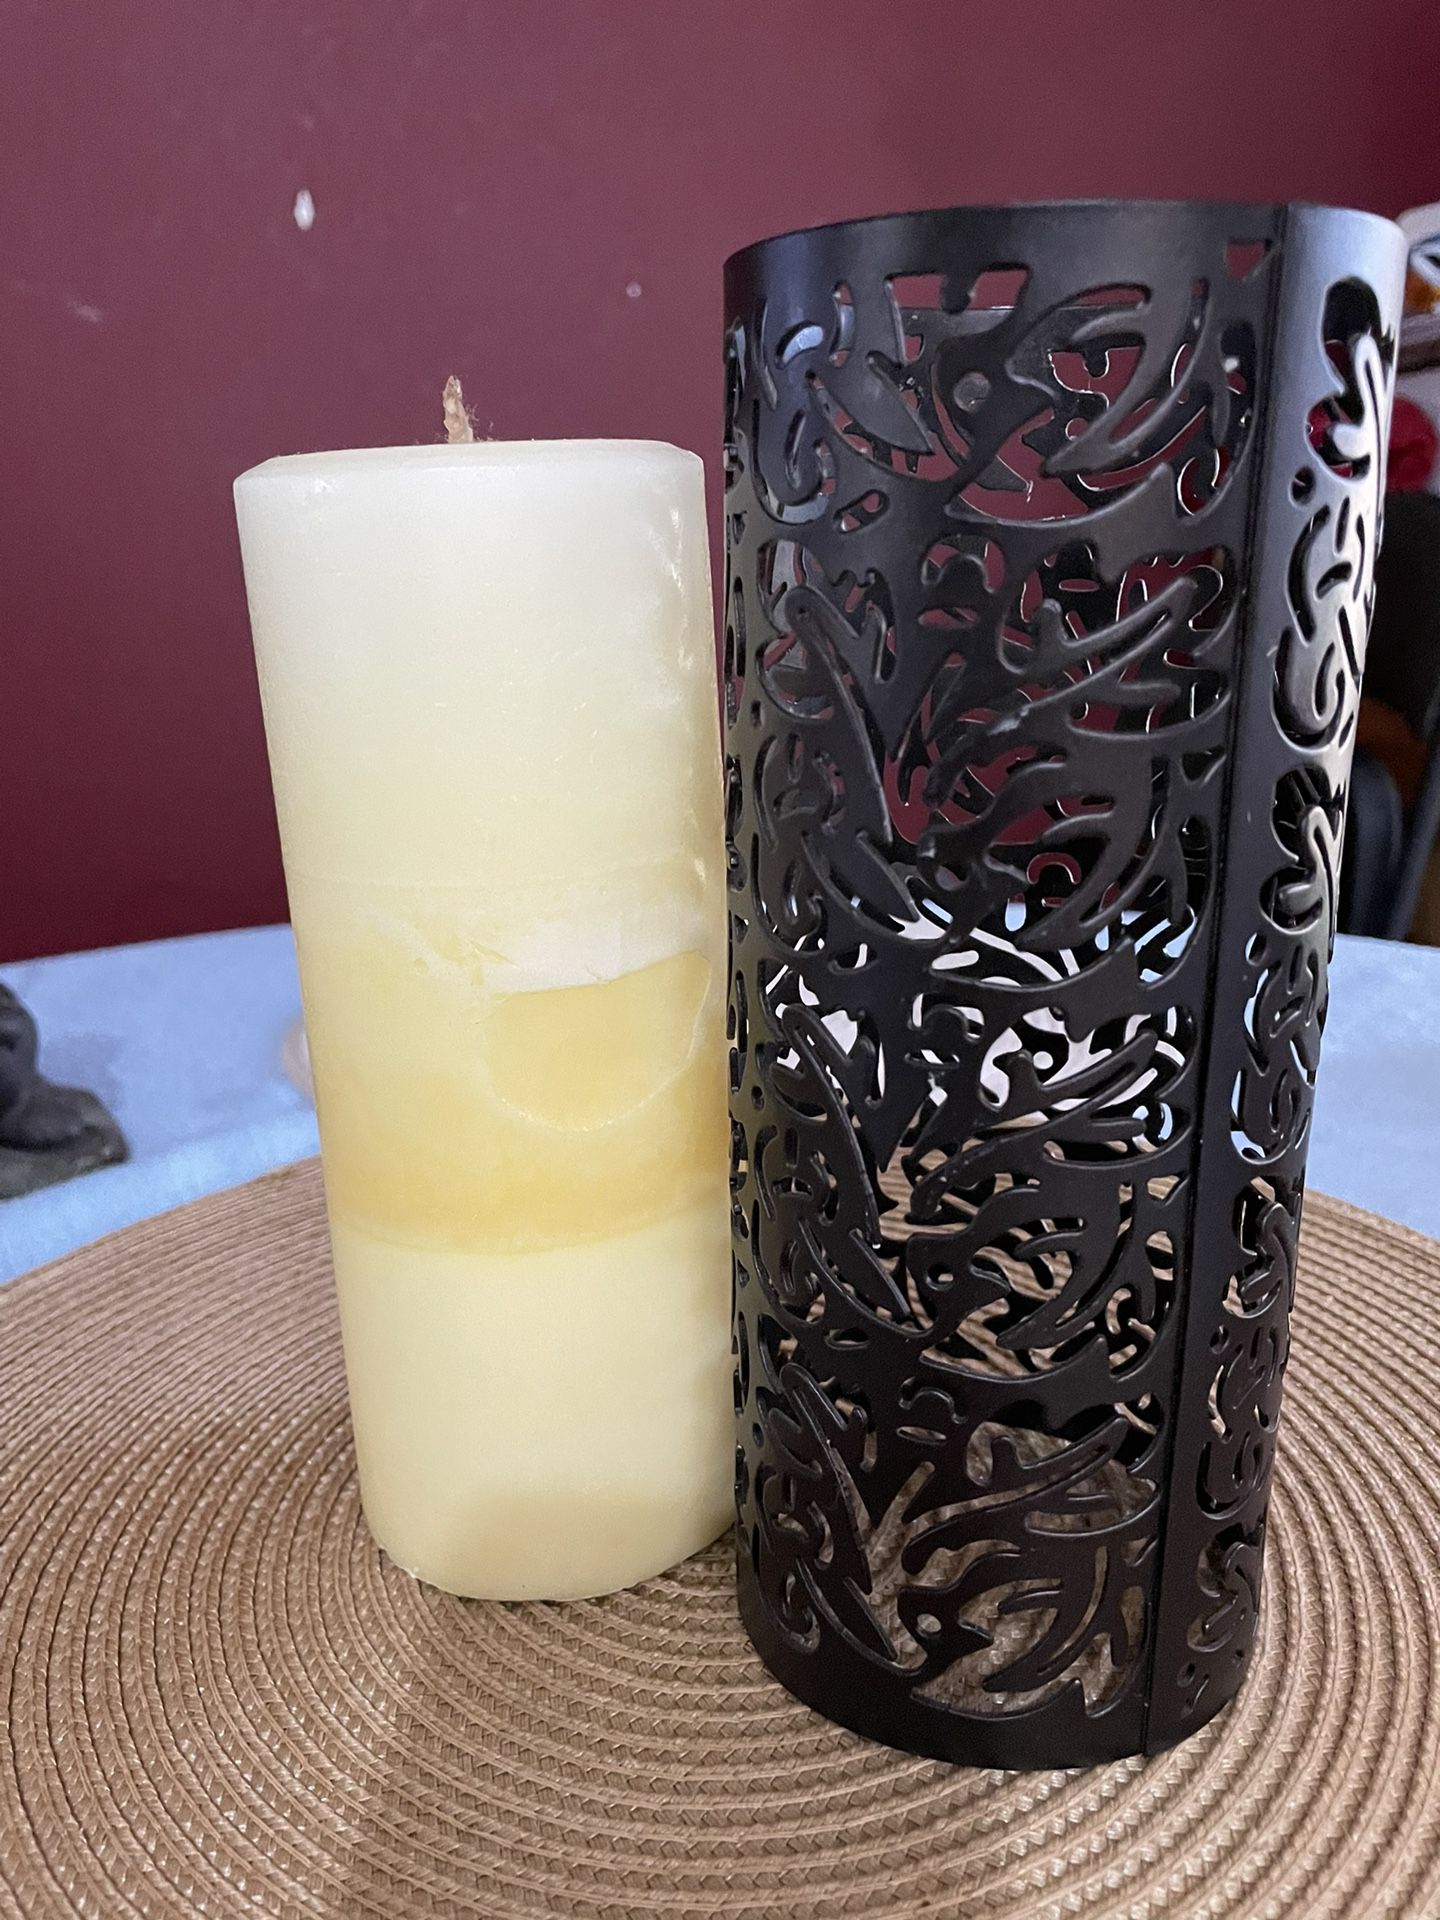 PartyLite Pillar Candle Holder & Candle